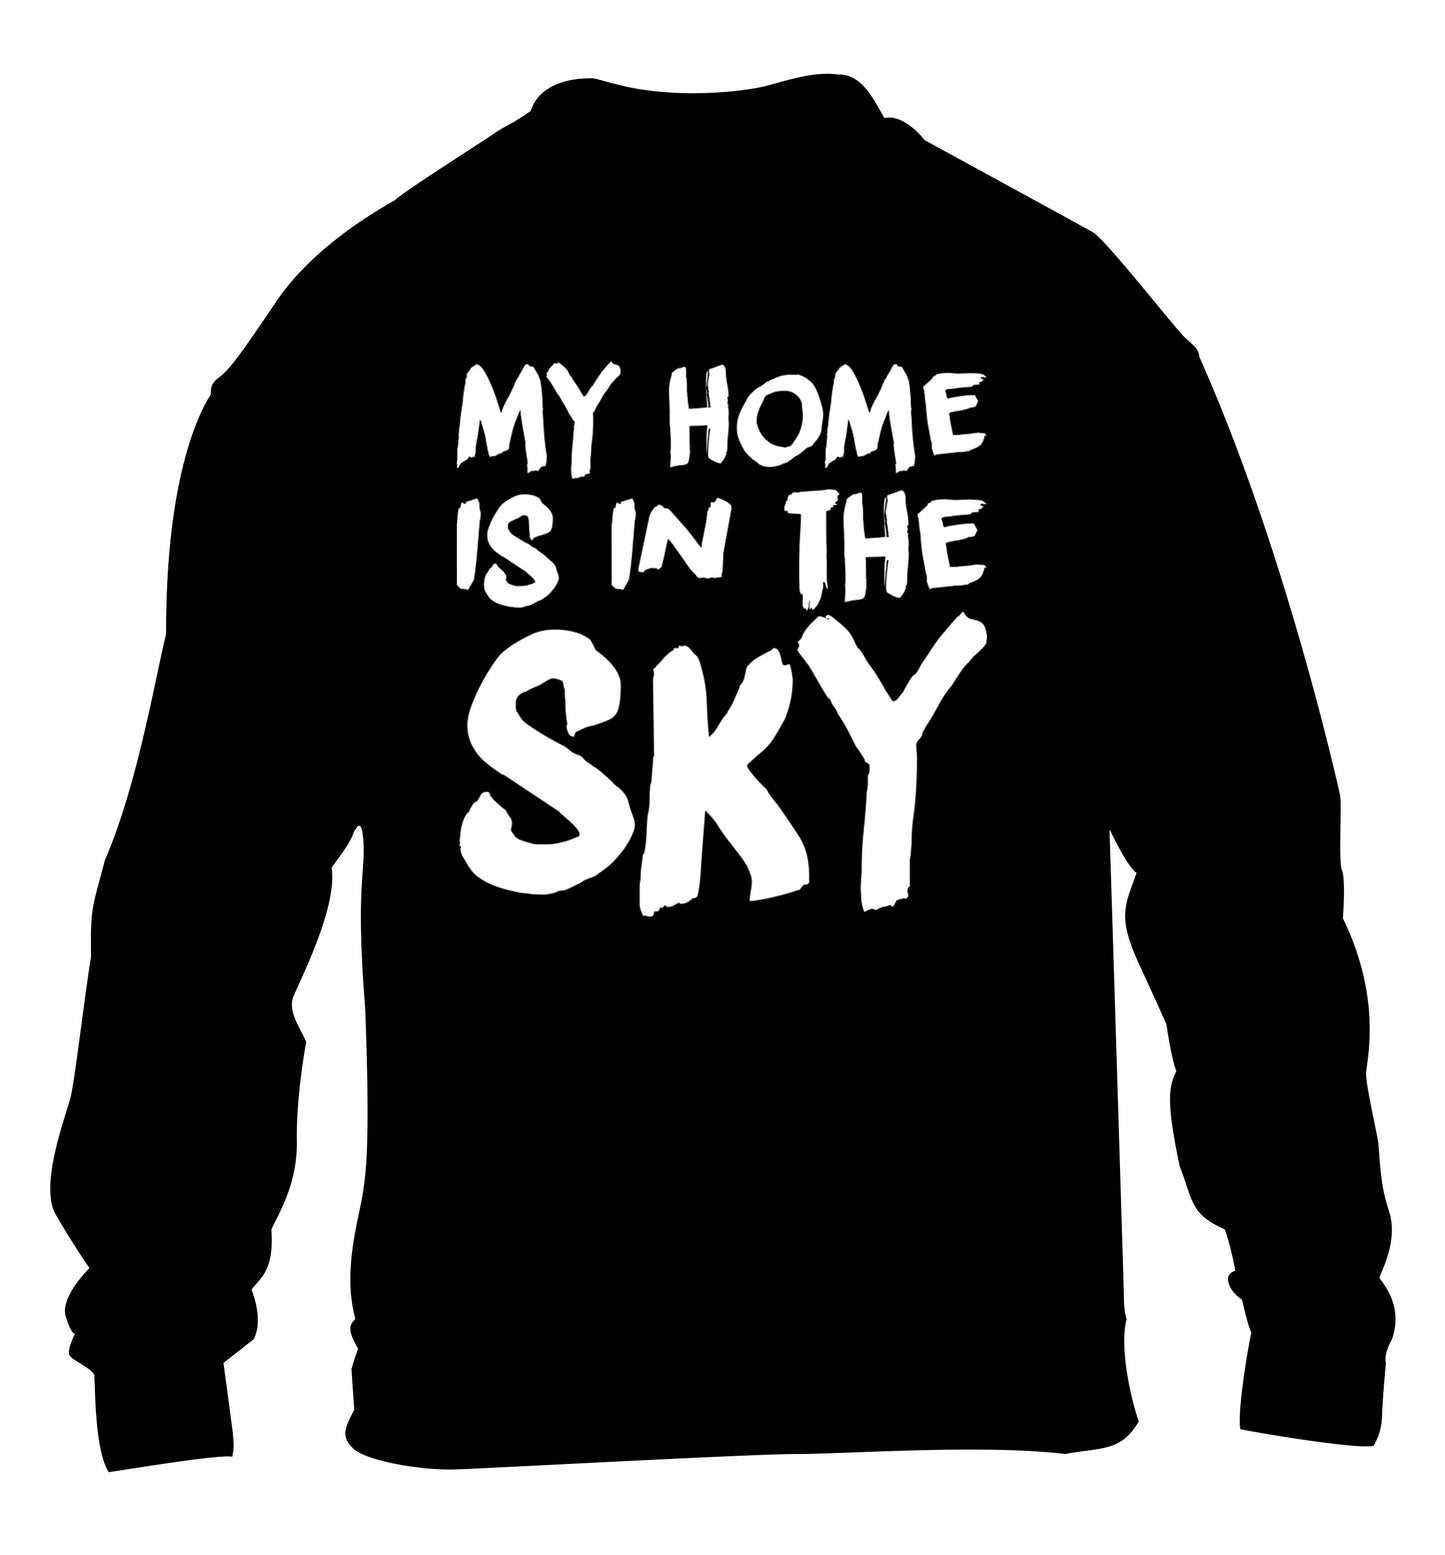 My home is in the sky children's black sweater 12-14 Years